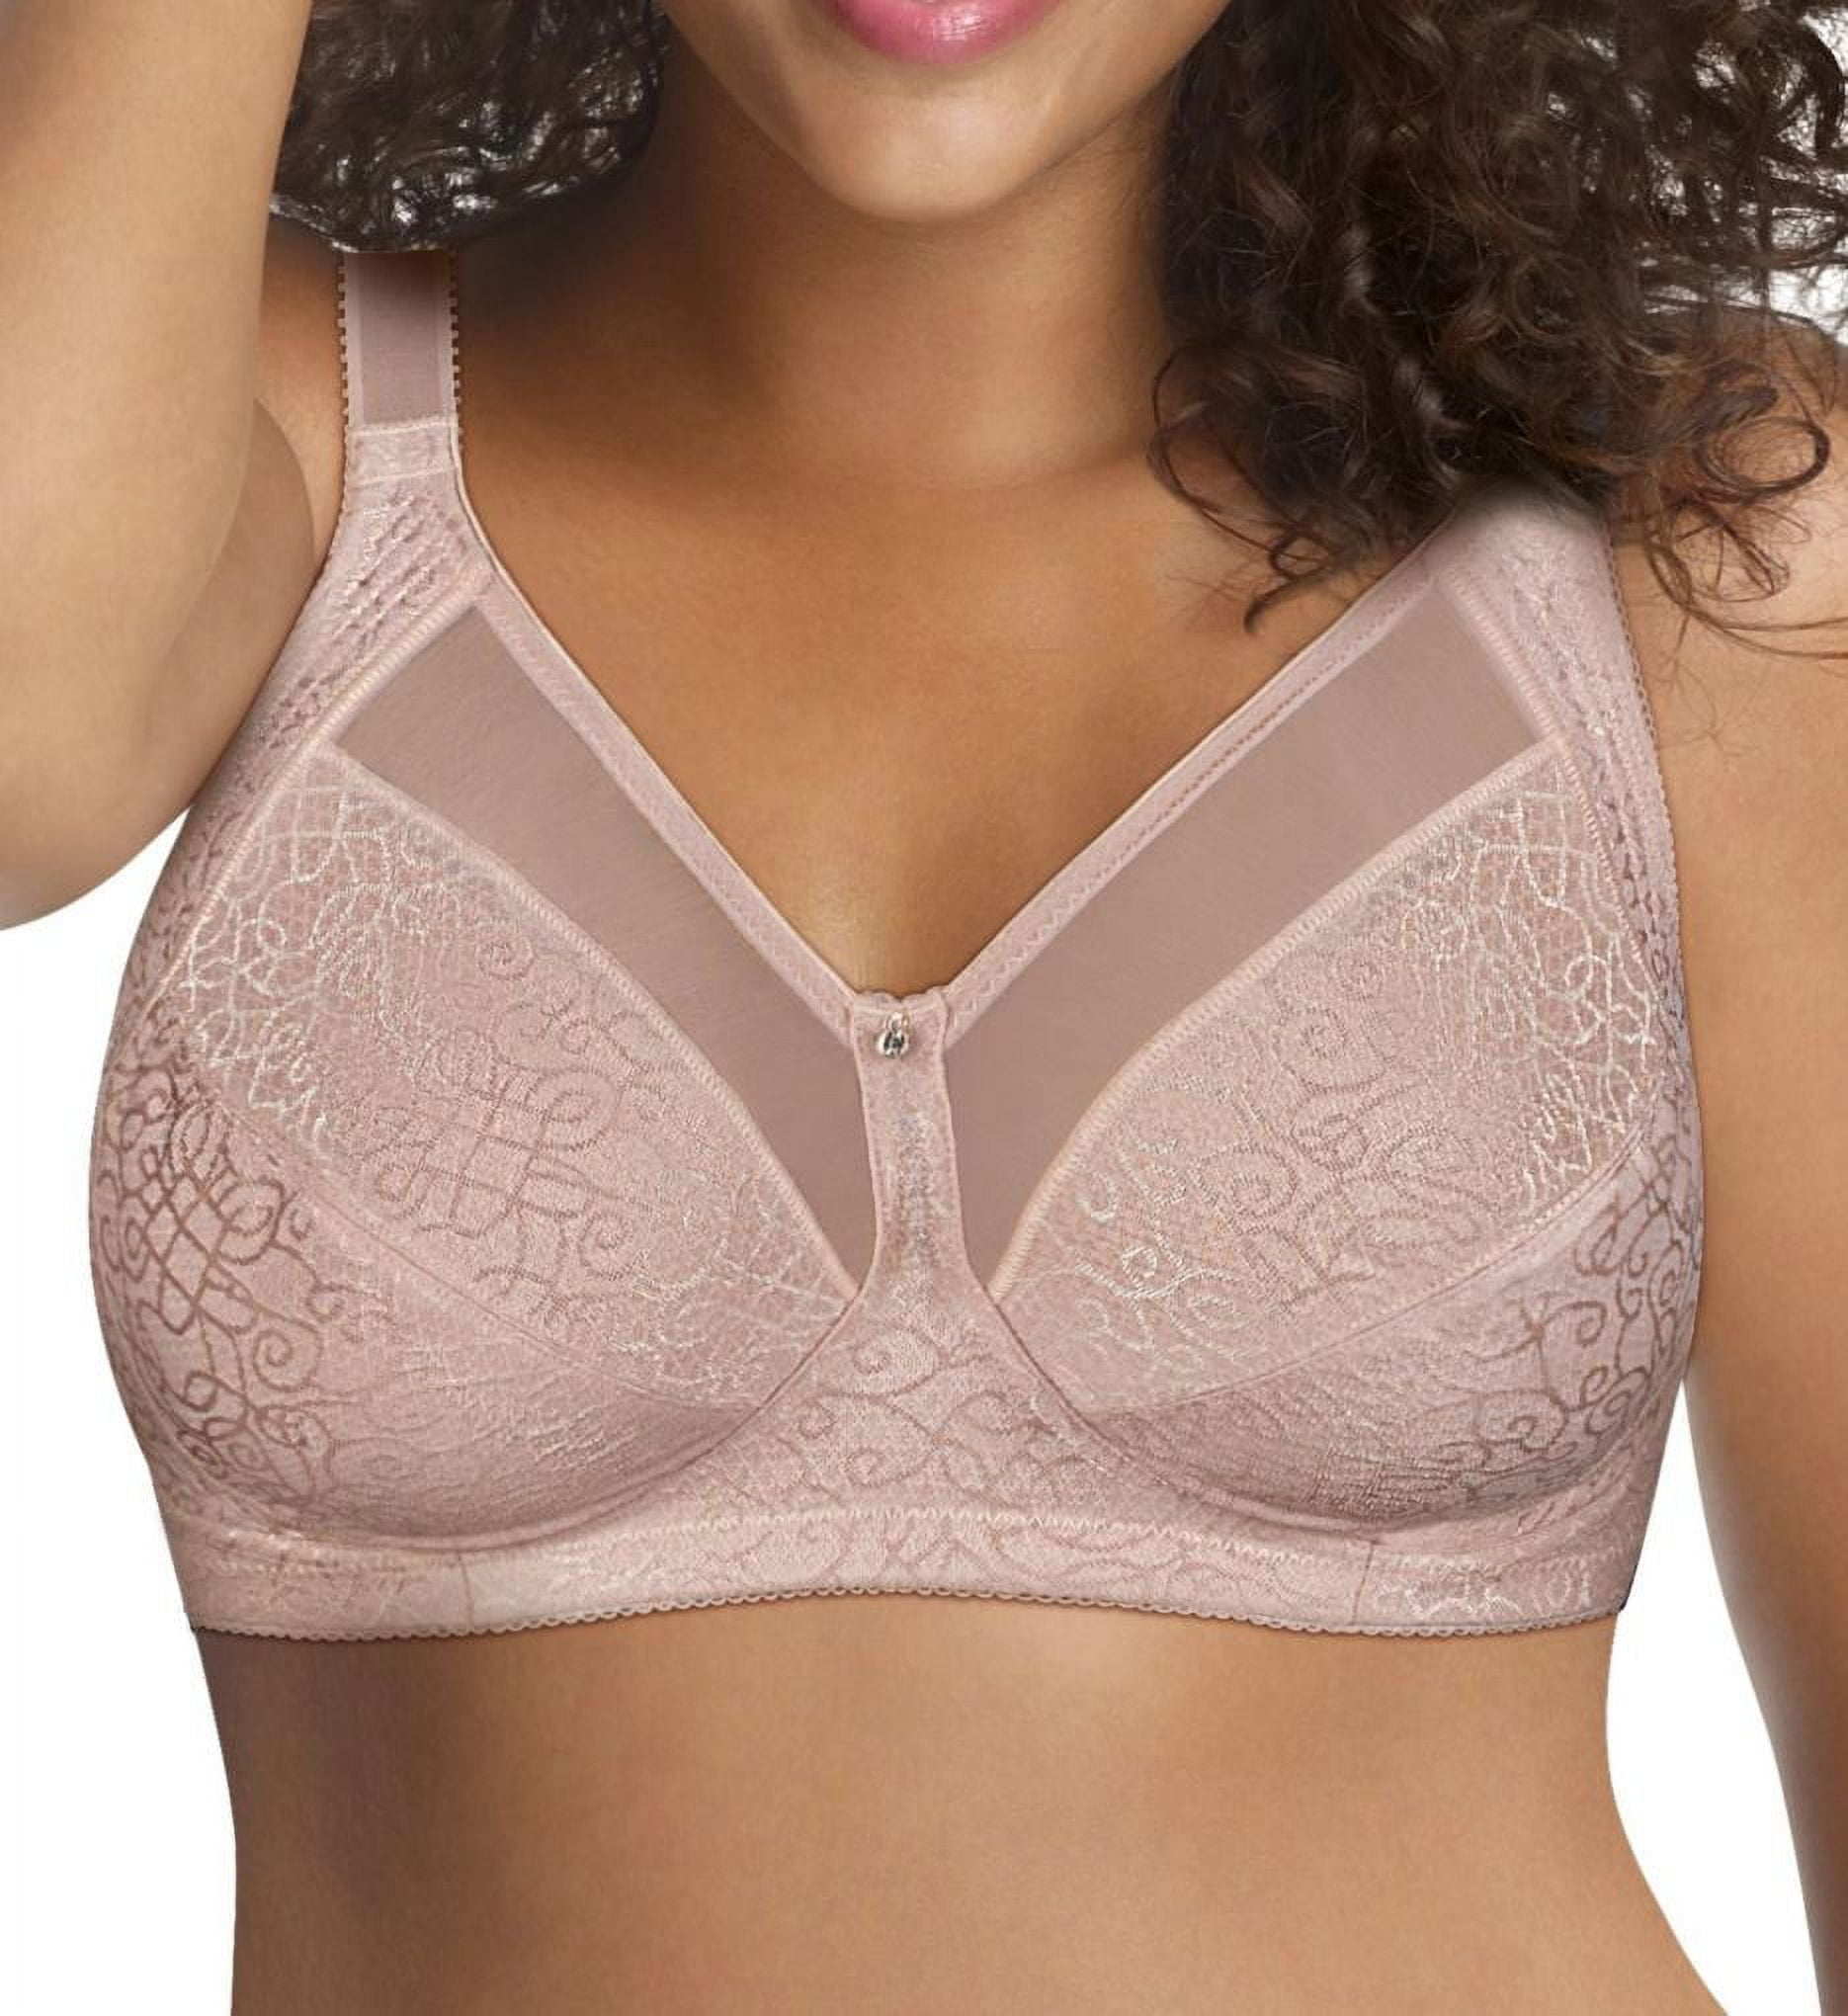 Just My Size Comfort Shaping Wirefree Bra Sandshell 48D Women's